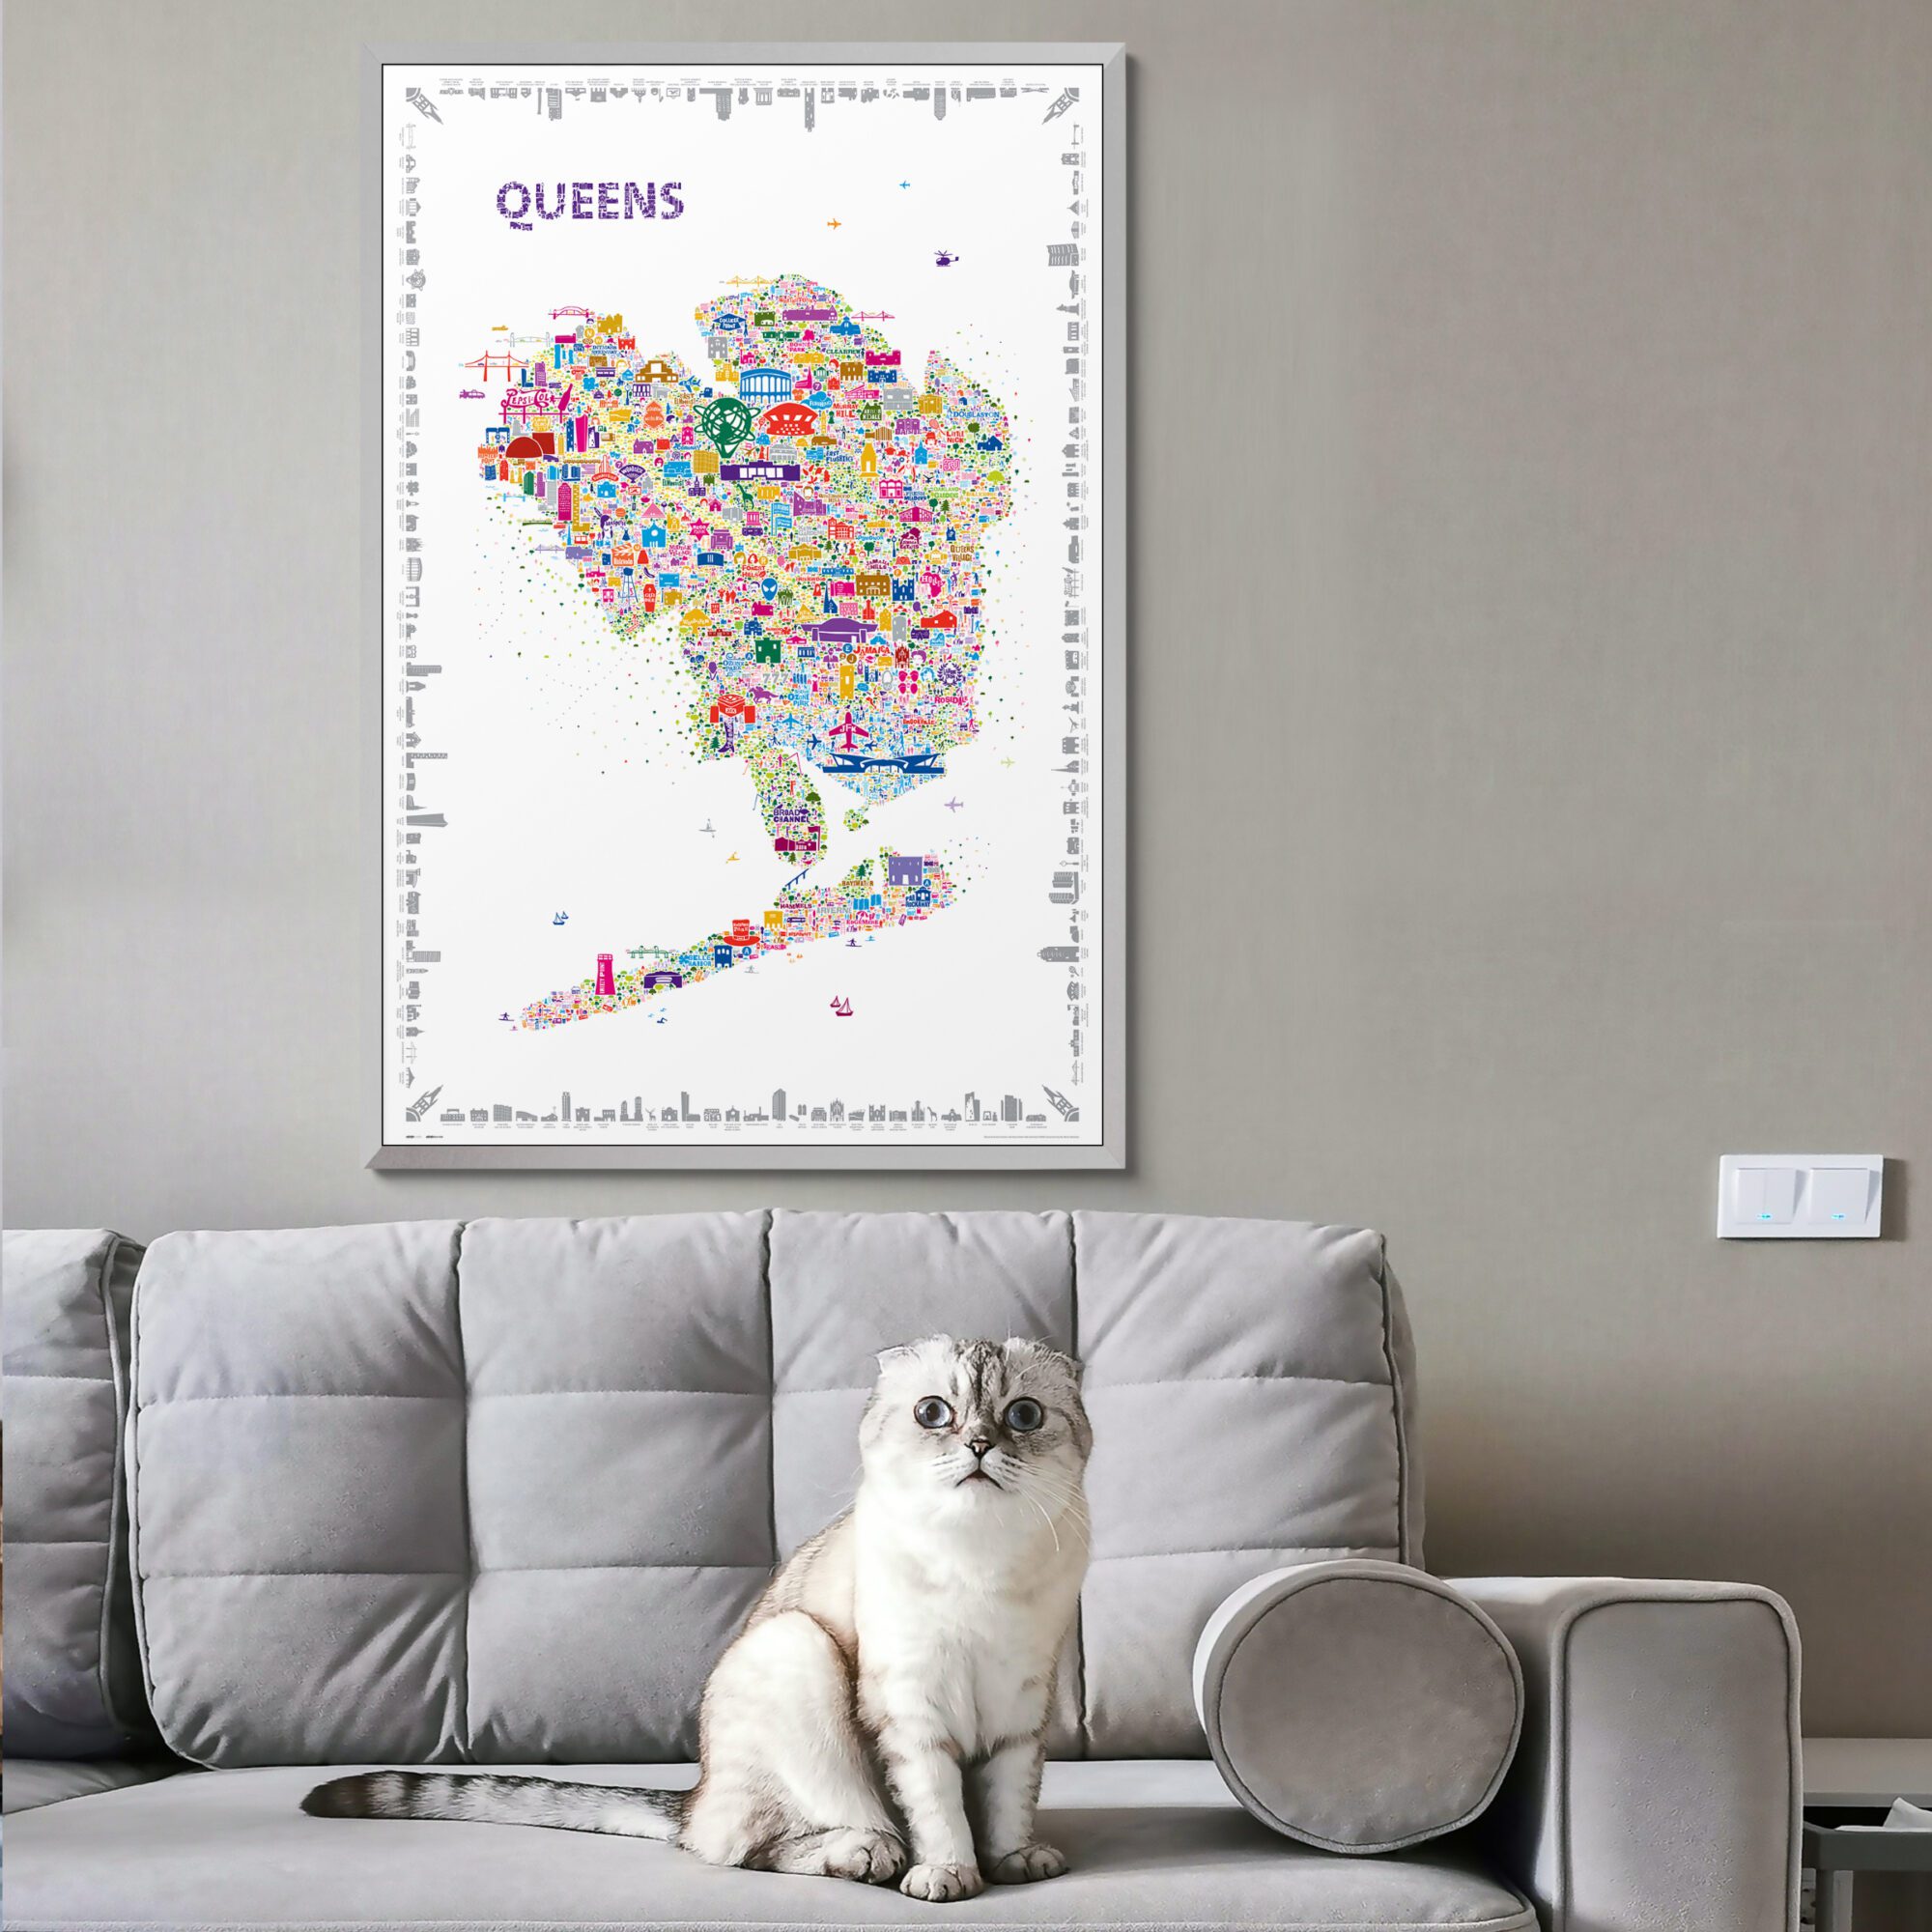 Alfalfa New York Iconic Queens Poster Artwork For Home Walls Unique Designer Wall Art of Trendy Colorful Map Borough City Decor Travel Posters Vintage Maps Perfect Housewarming Holiday Gift Souvenir Paper Print Artwork For Home Office Living Room